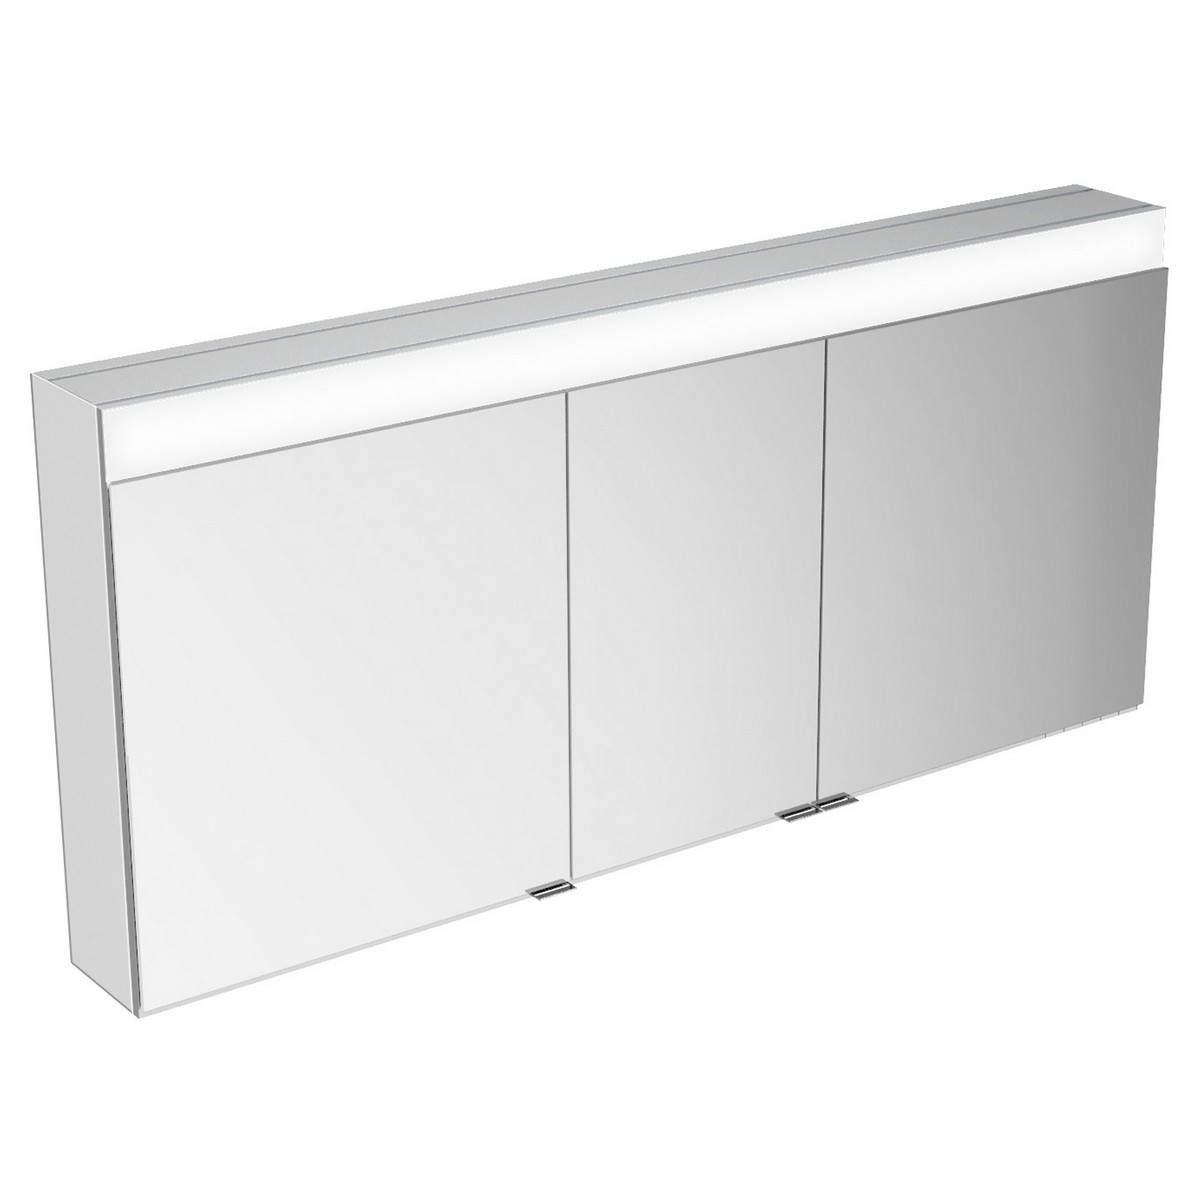 KEUCO 21523171351 EDITION 400 55 1/2 W X 6 1/2 D X 25 5/8 H INCH 3-DOOR 2700-6500K LED WALL MOUNTED MIRROR MEDICINE CABINET IN ALUMINUM